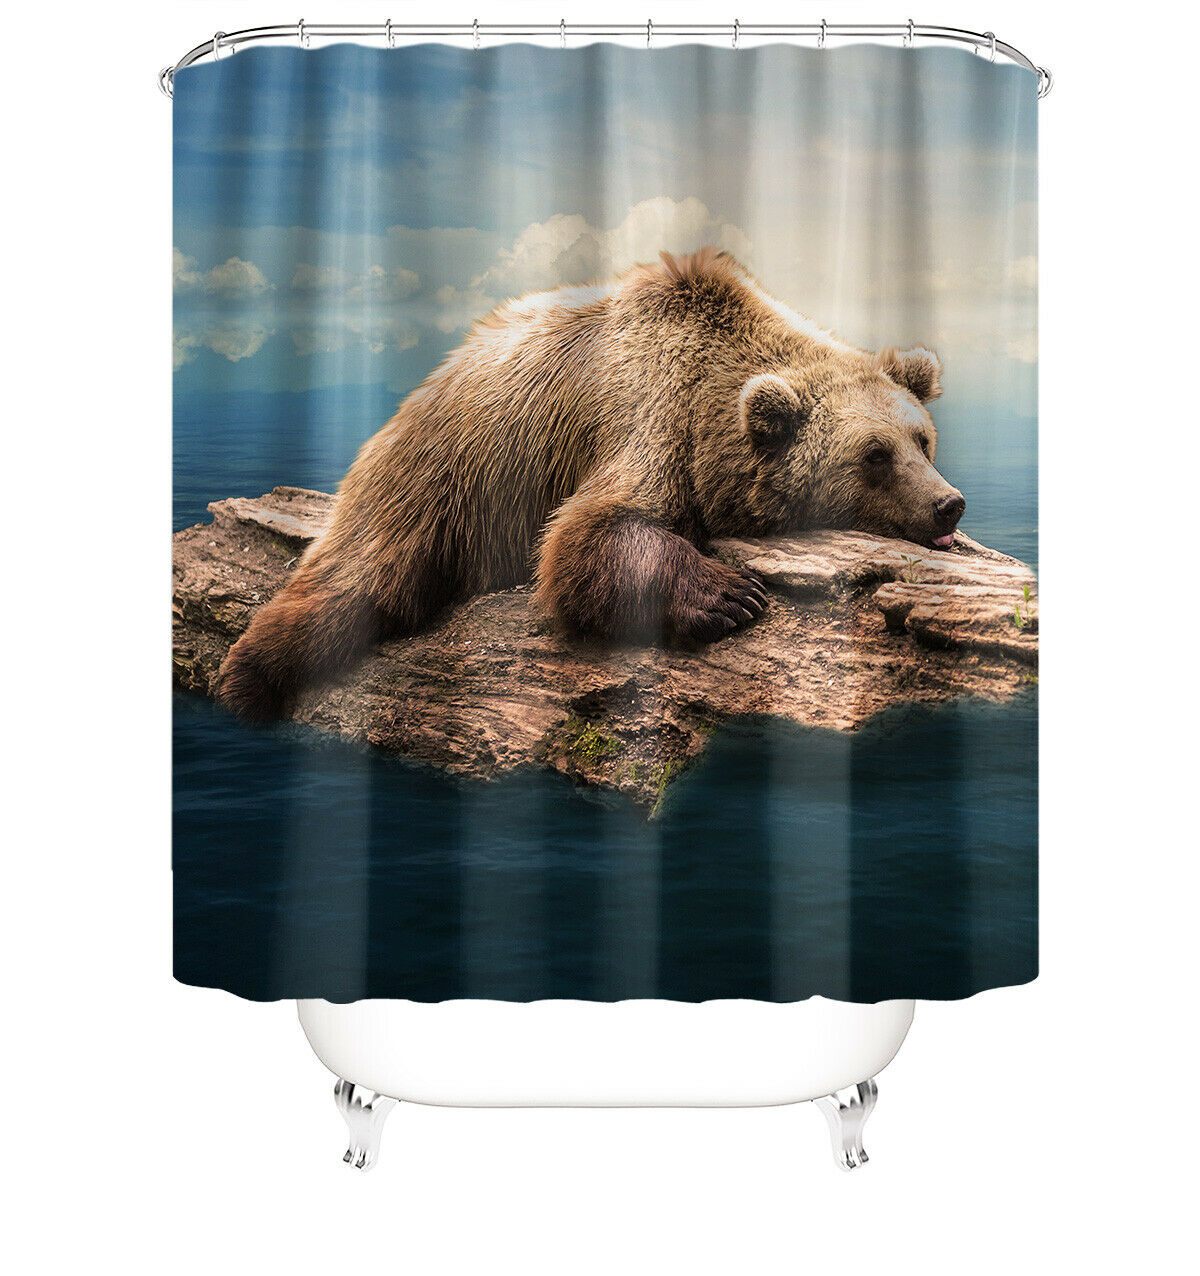 Bear Shower Curtain Bathroom Rug Set Thick Bath Mat Non-Slip Toilet Lid Cover-180×180cm Shower Curtain Only-Free Shipping at meselling99